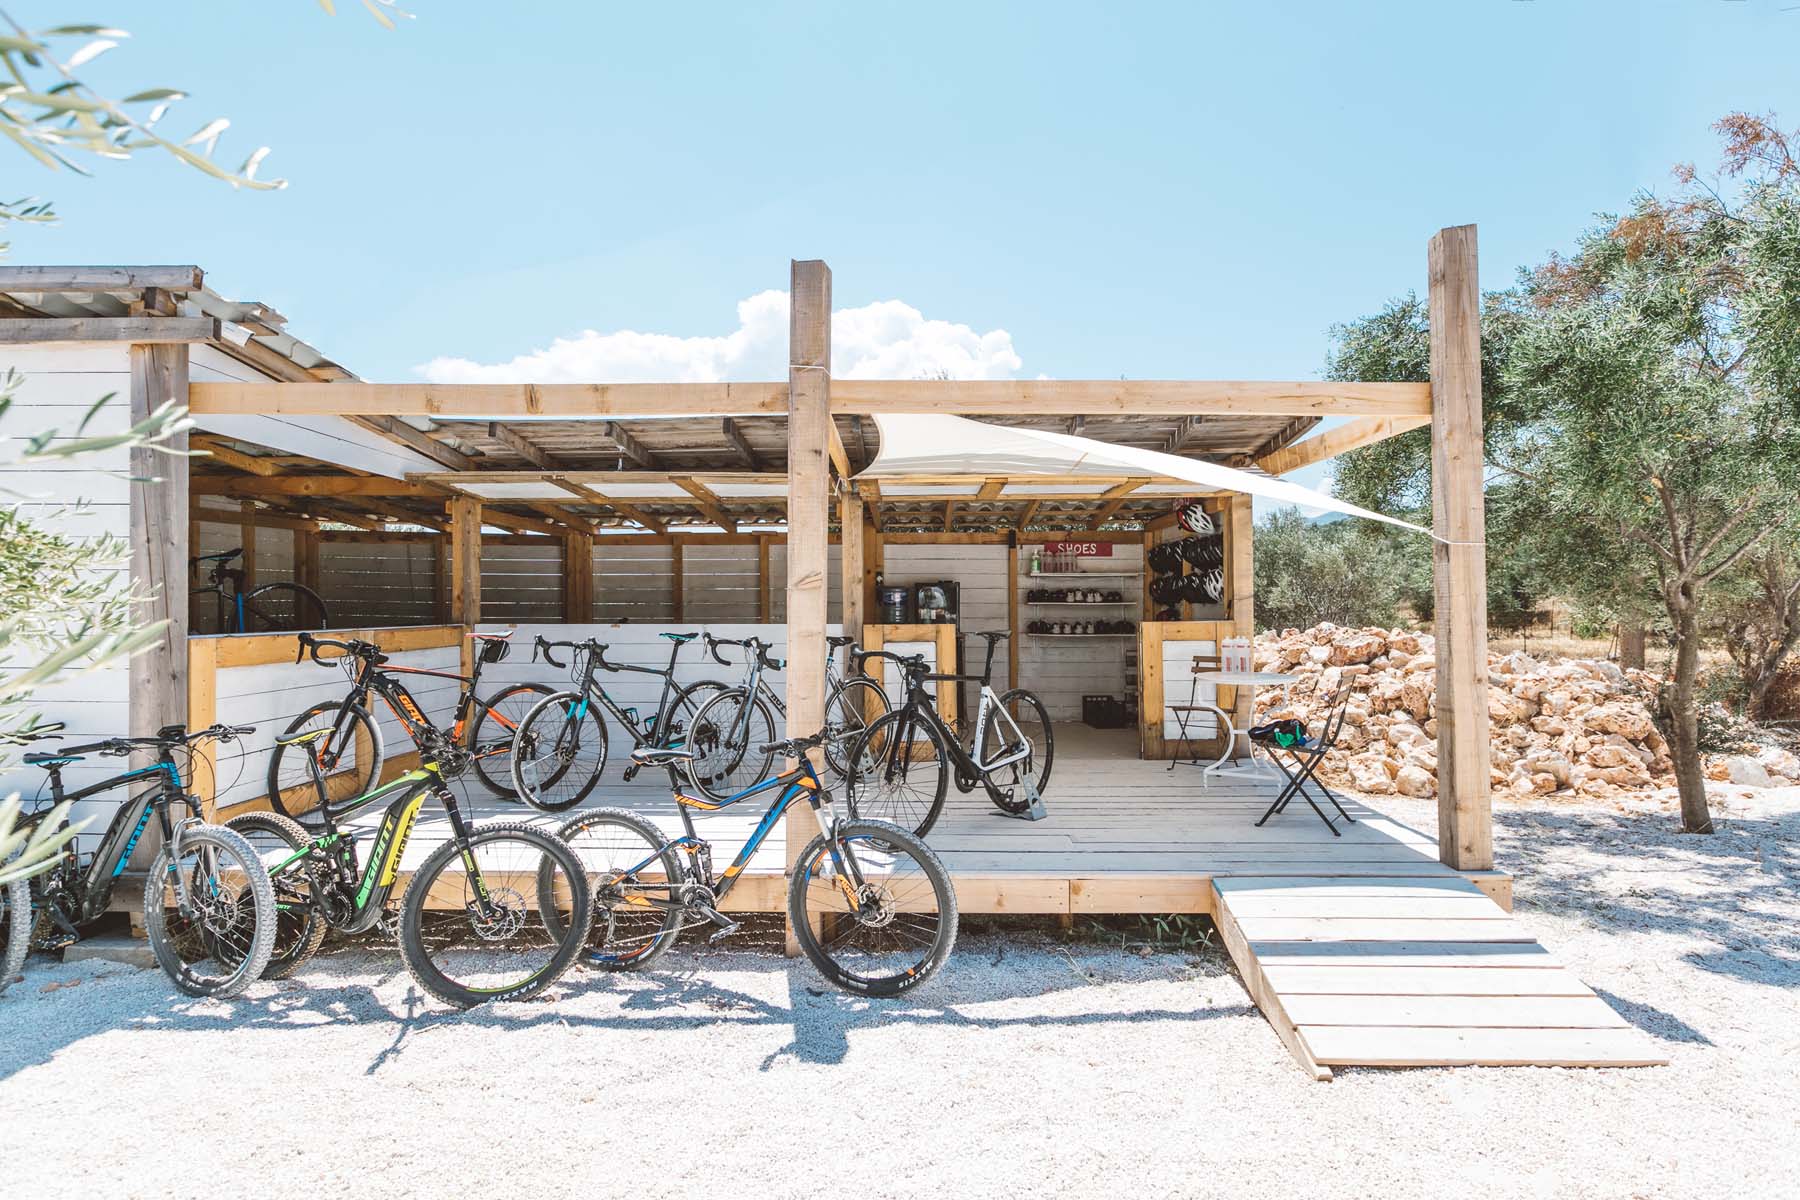 Peligoni's bike shed and collection of bikes